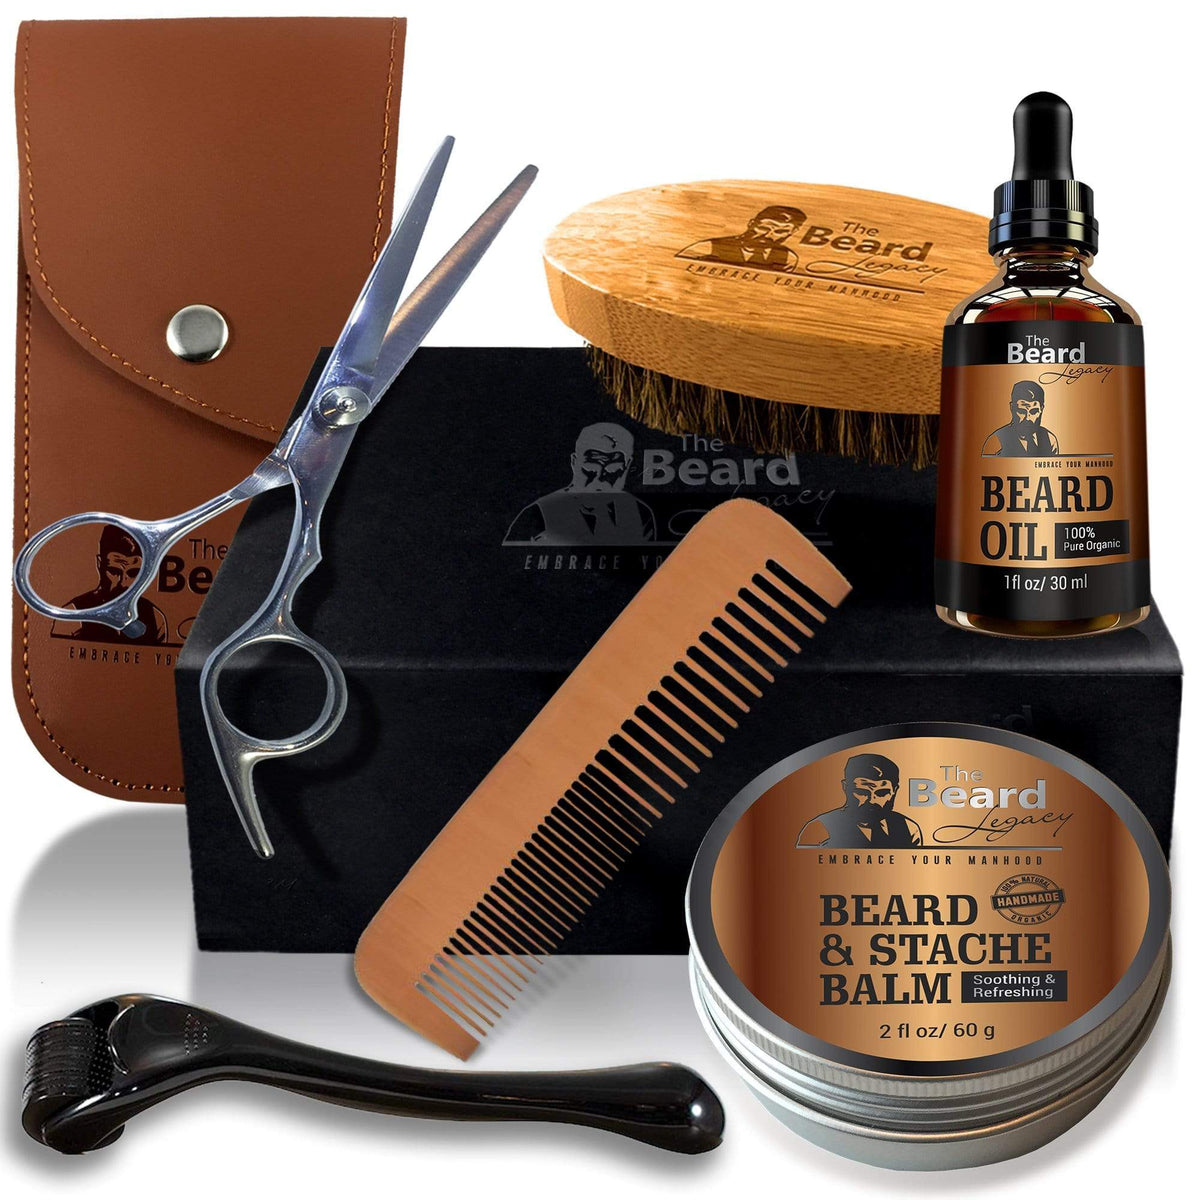 The Beard Legacy A Complete Beard Grooming Kit For Men 7965